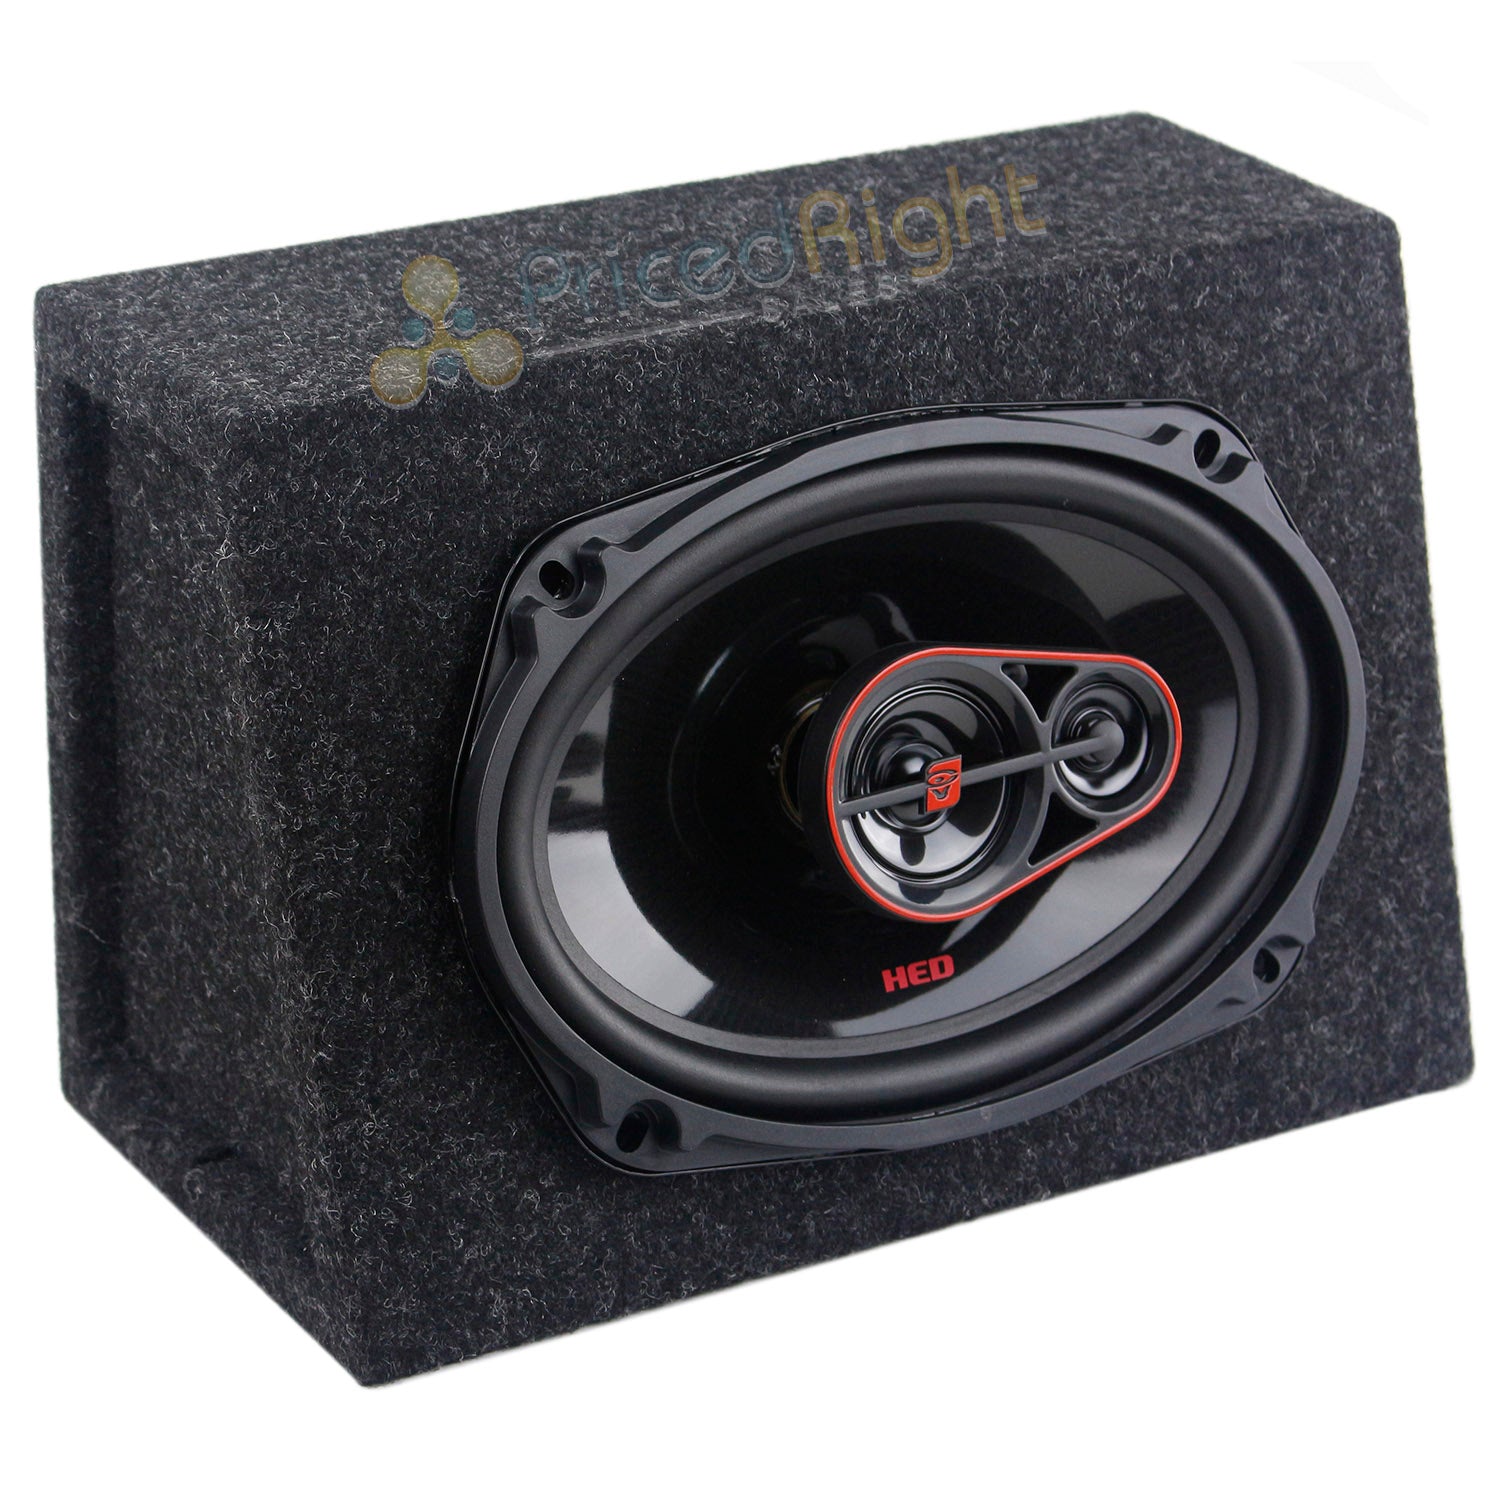 Cerwin Vega H7693 6x9" 3-Way Coaxial Speakers With Angled Enclosure Speaker Box